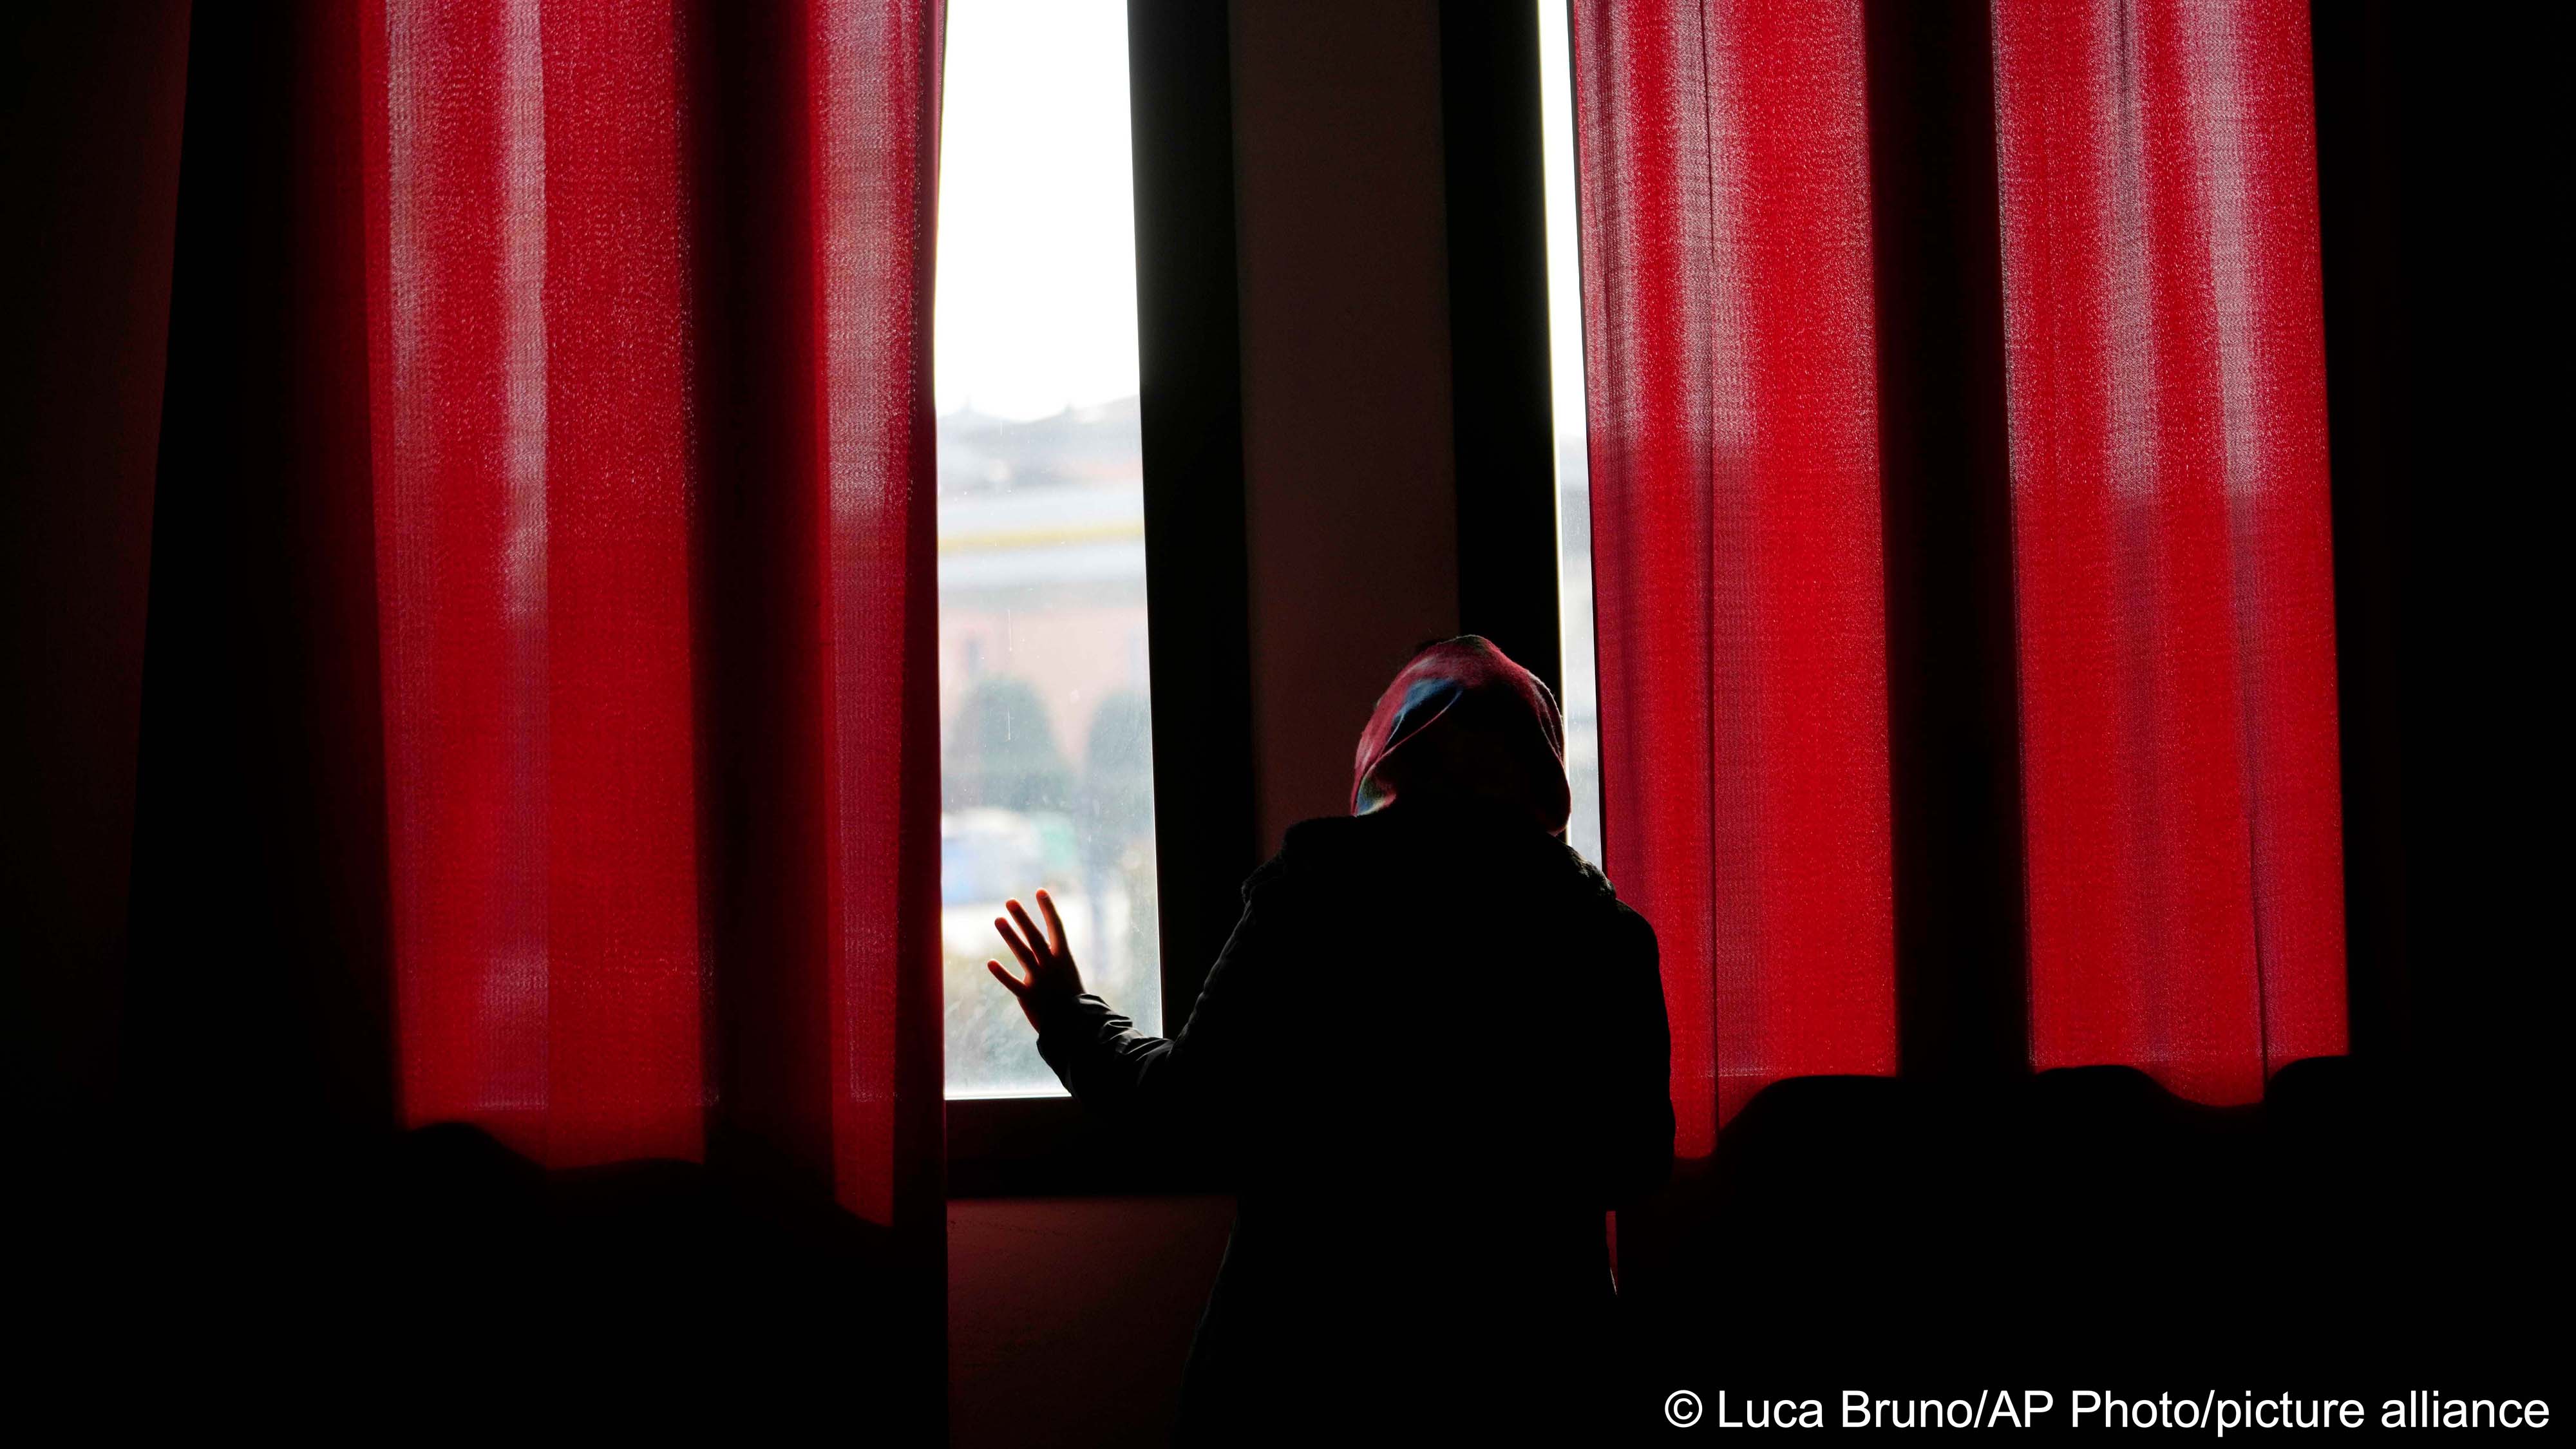 Pakistani-born Iram Aslam, 29, peeks through the window of a local social activities centre in Guastalla, northern Italy, 11 February 2023, during an interview with The Associated Press (image: Luca Bruno/AP Photo/picture alliance) 